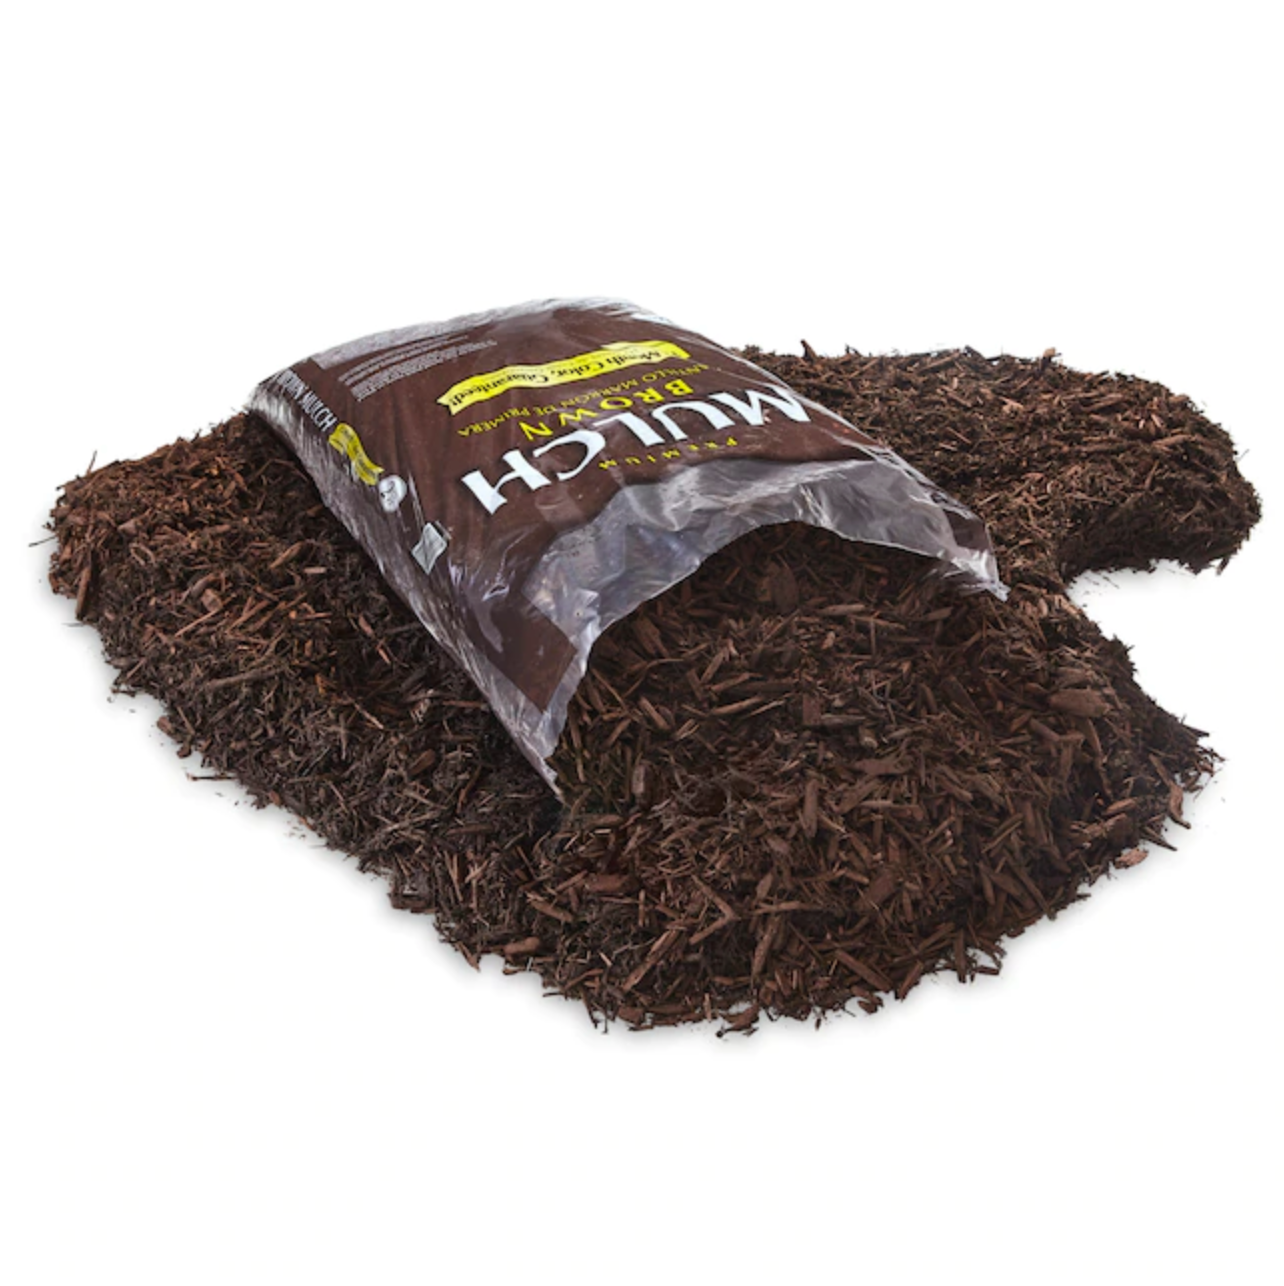 Get Mulch for $2 Per Bag at Lowe's SpringFest